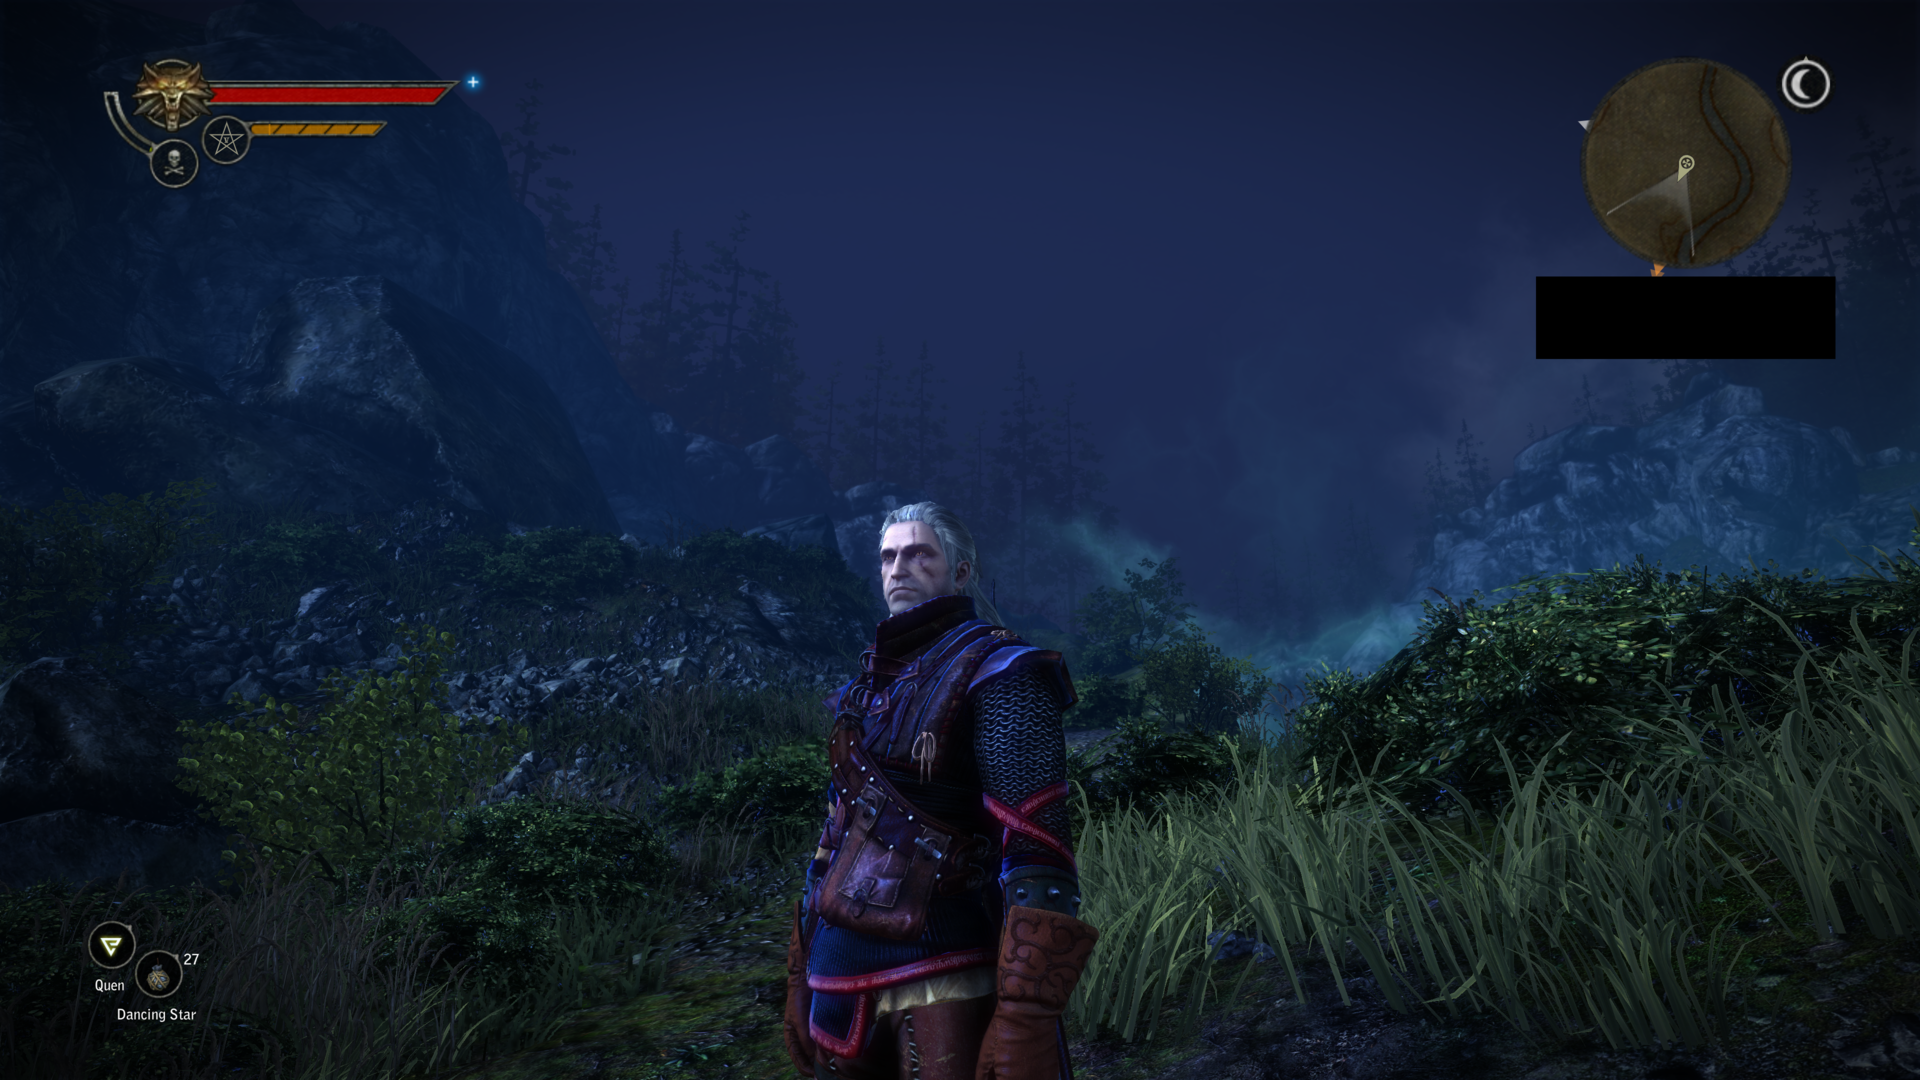 witcher22013-01-1919-78sq4.png